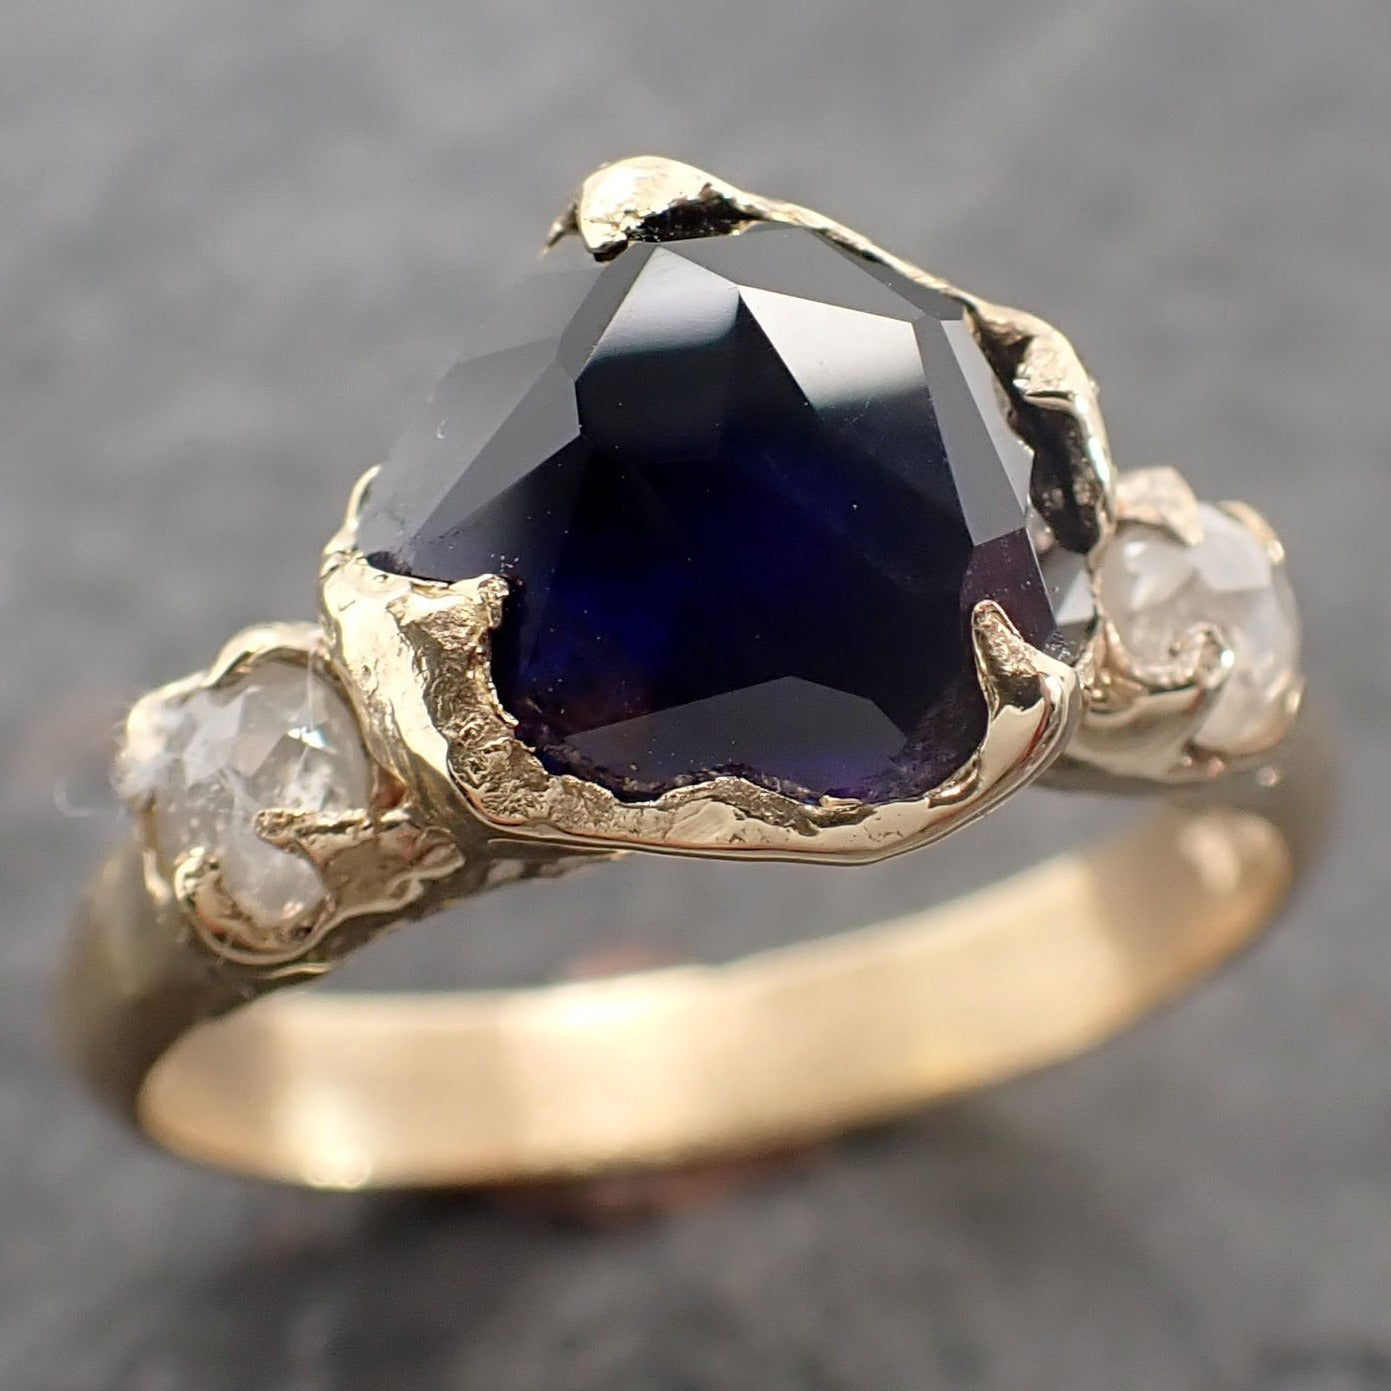 Buy Birth Stone Finger Ring (Blue Sapphire Stone) in India | Chungath  Jewellery Online- Rs. 51,090.00